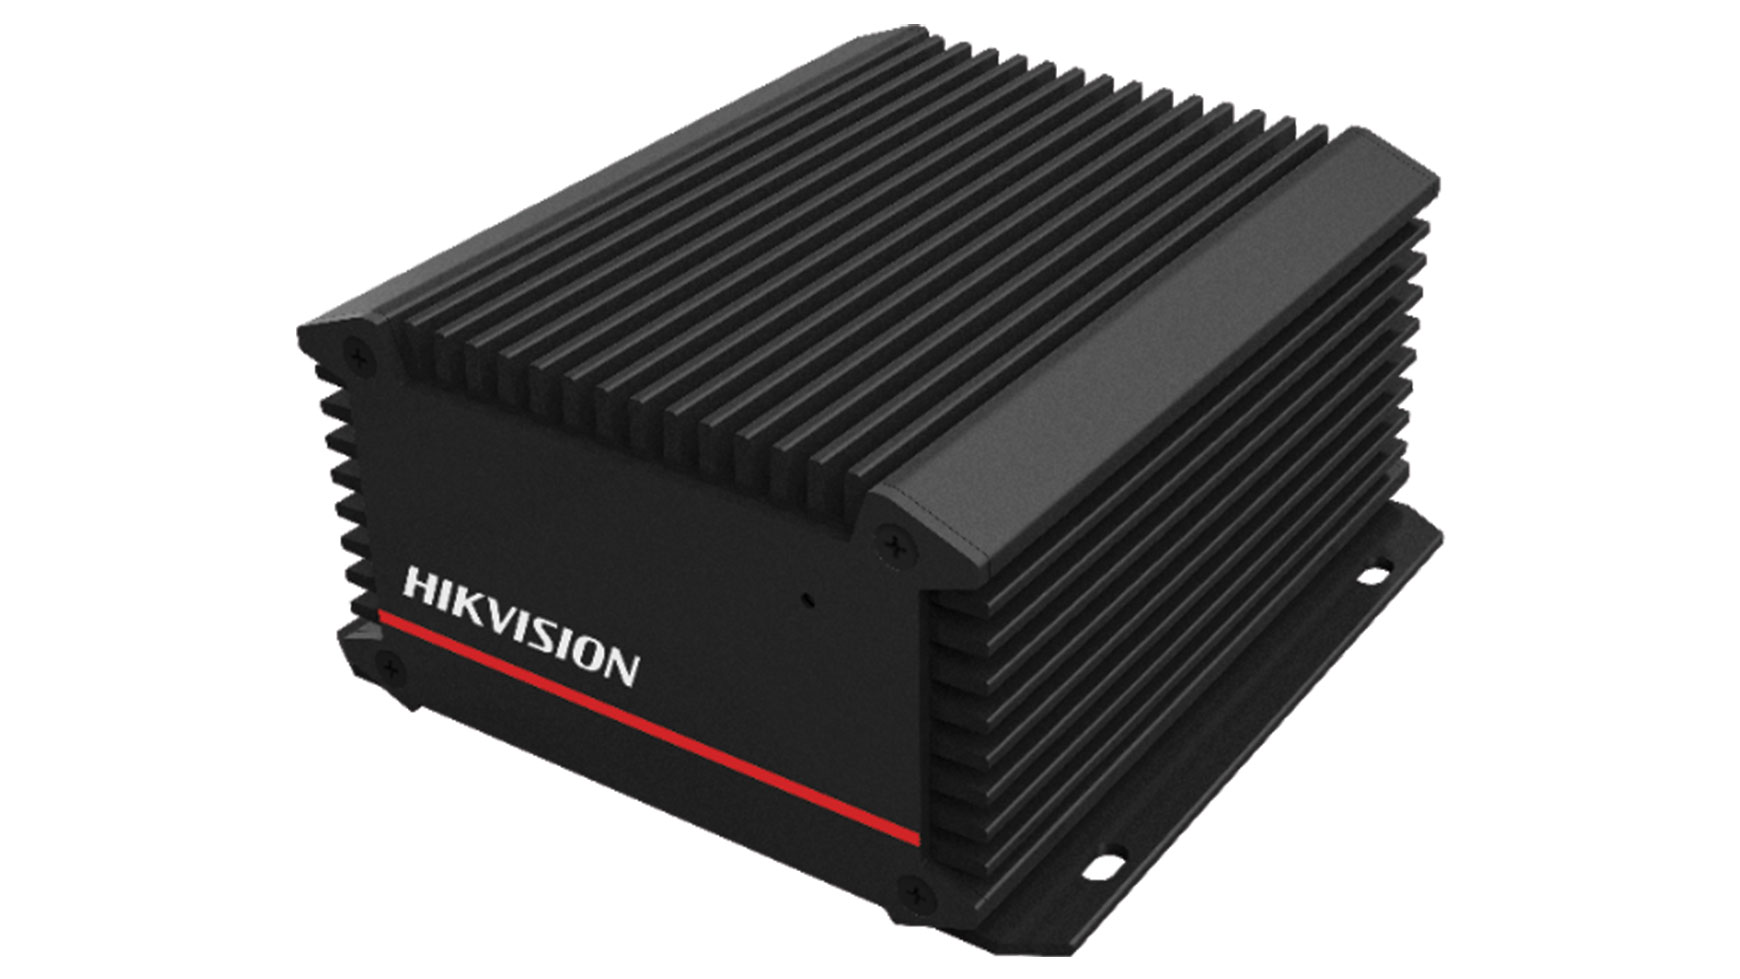 Hikvision DS-6700NI-S